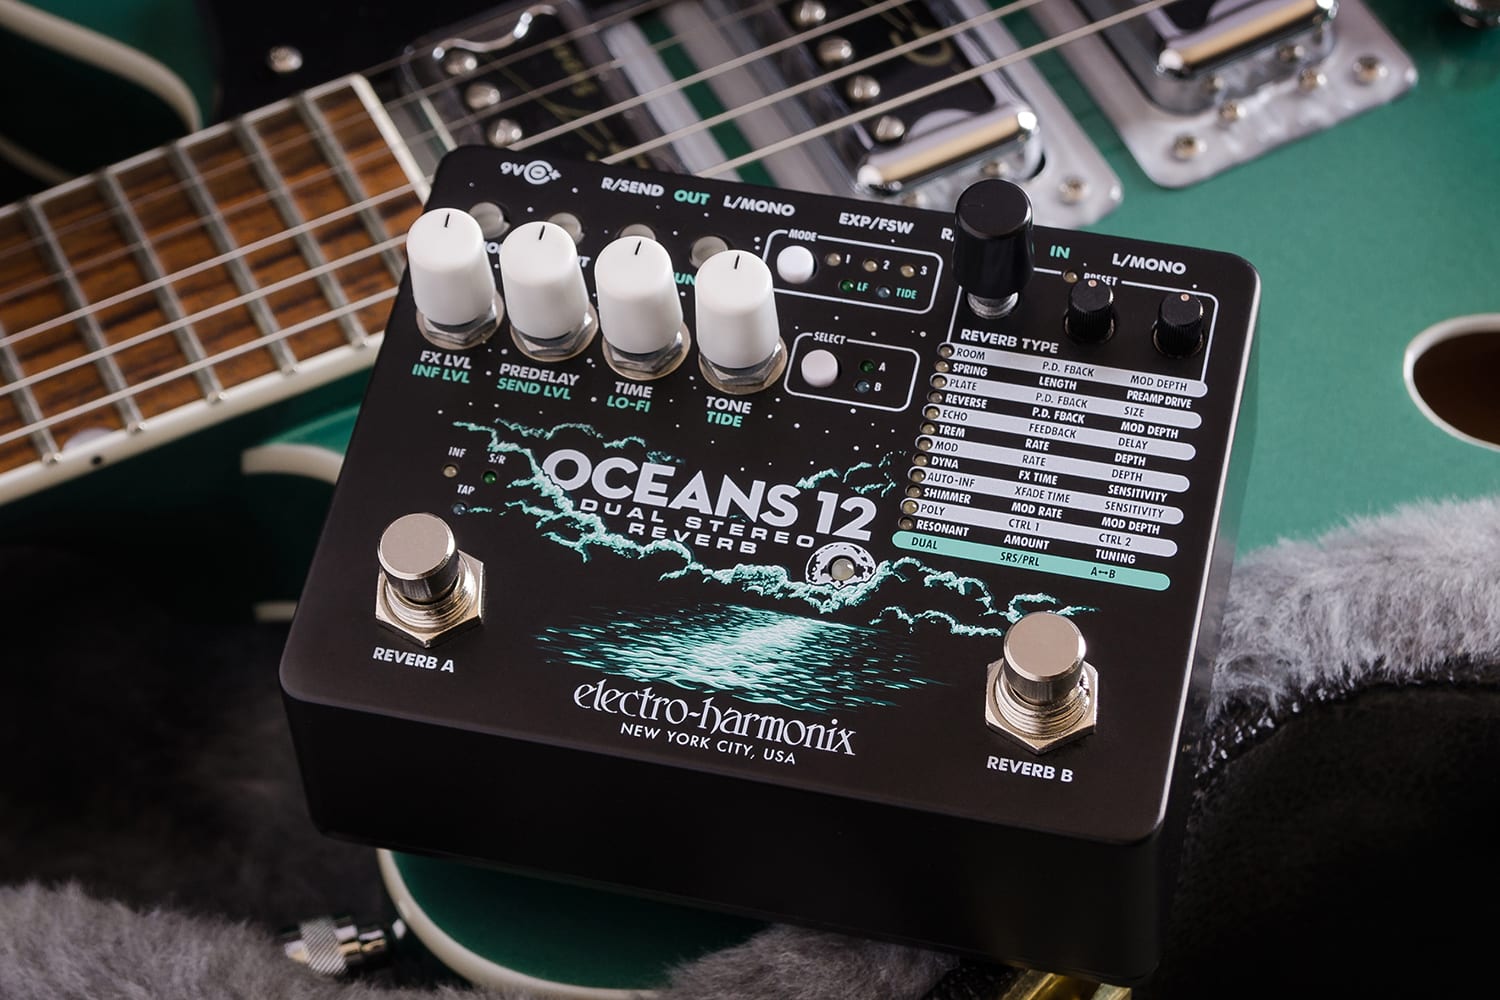 Electro-Harmonix Unveils the Oceans 12 Multifunction, Dual-Stereo Reverb Pedal